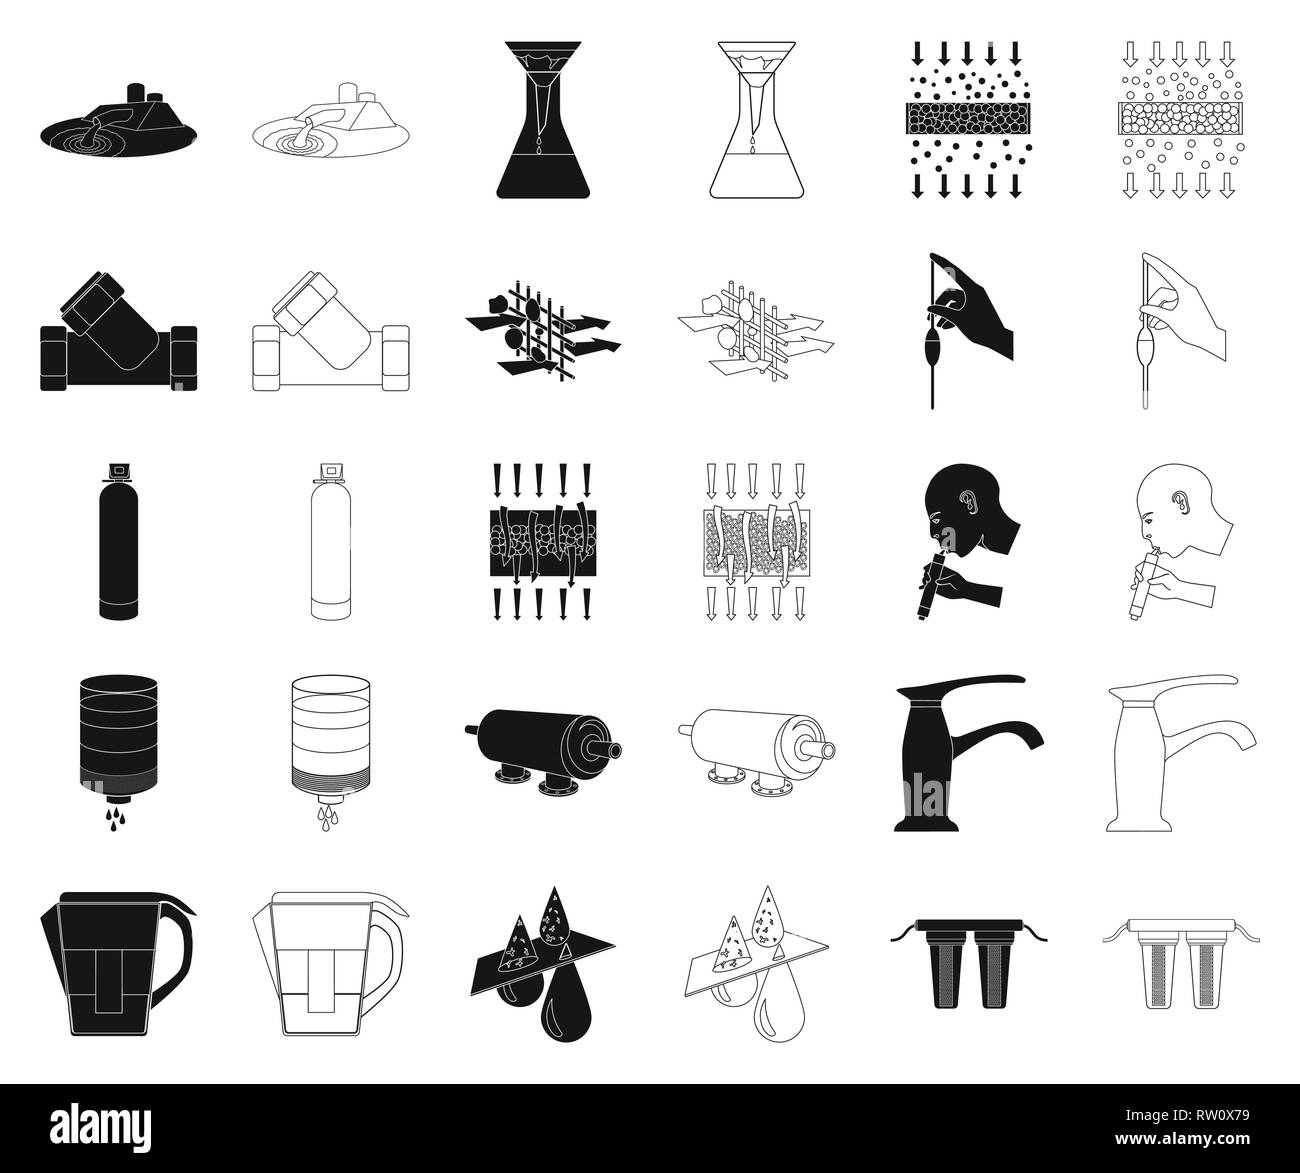 art,black,outline,bulb,carbonic,cartridge,cleaning,collection,compact,conical,contamination,design,drink,equipment,faucet,filler,filling,filter,filters,filtration,fitting,fixture,flask,icon,illustration,impurity,isolated,jug,liquid,logo,machine,man,pipette,plant,plumbing,set,sign,solution,symbol,system,tee,through,treatment,vector,water,web Vector Vectors , Stock Vector